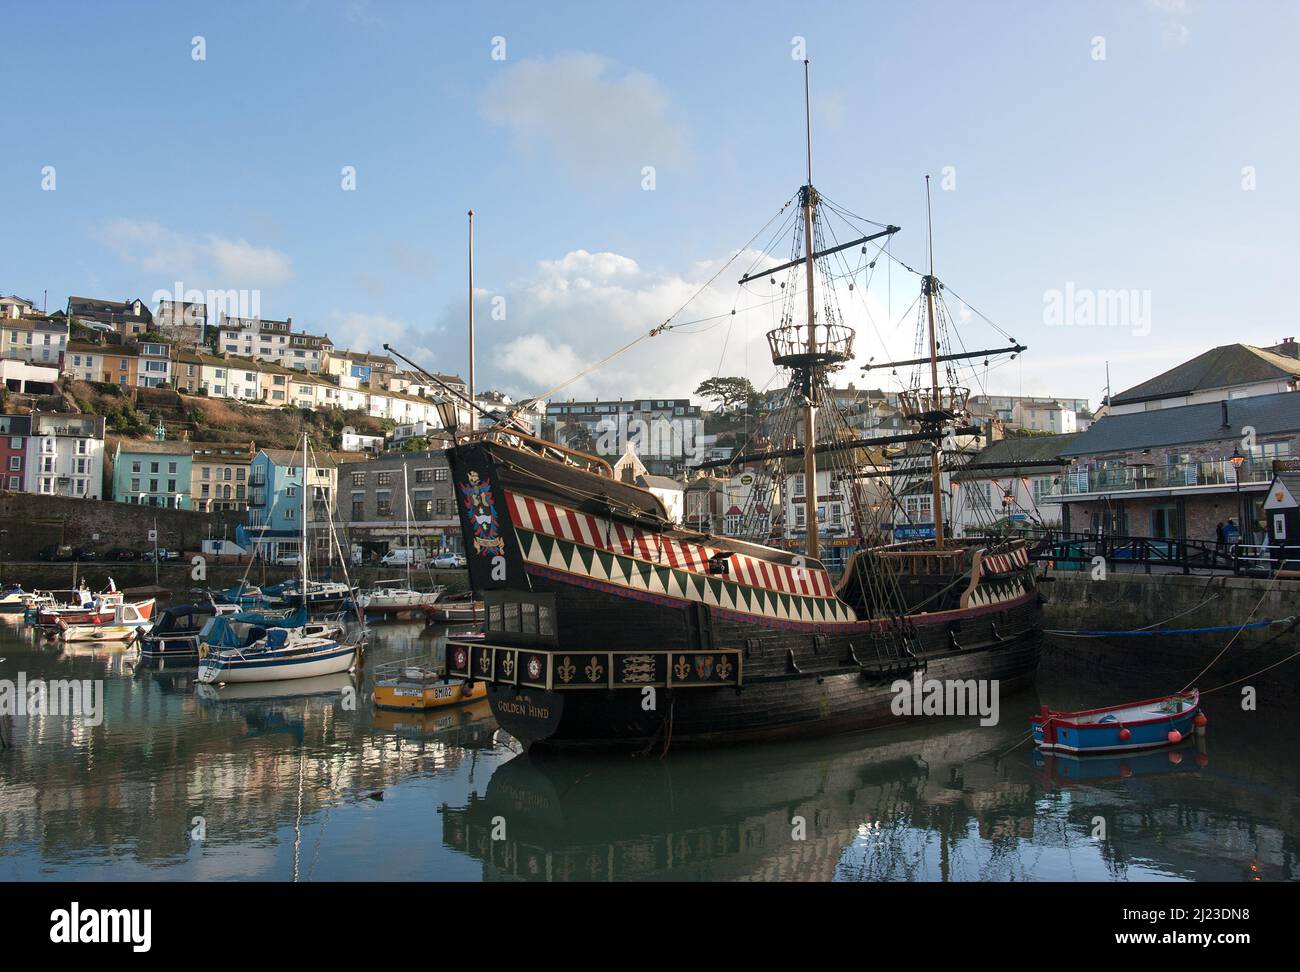 A replica of  Sir Francis Drake's ship 'Golden Hind' moored in Brixham Harbour, Devon Stock Photo